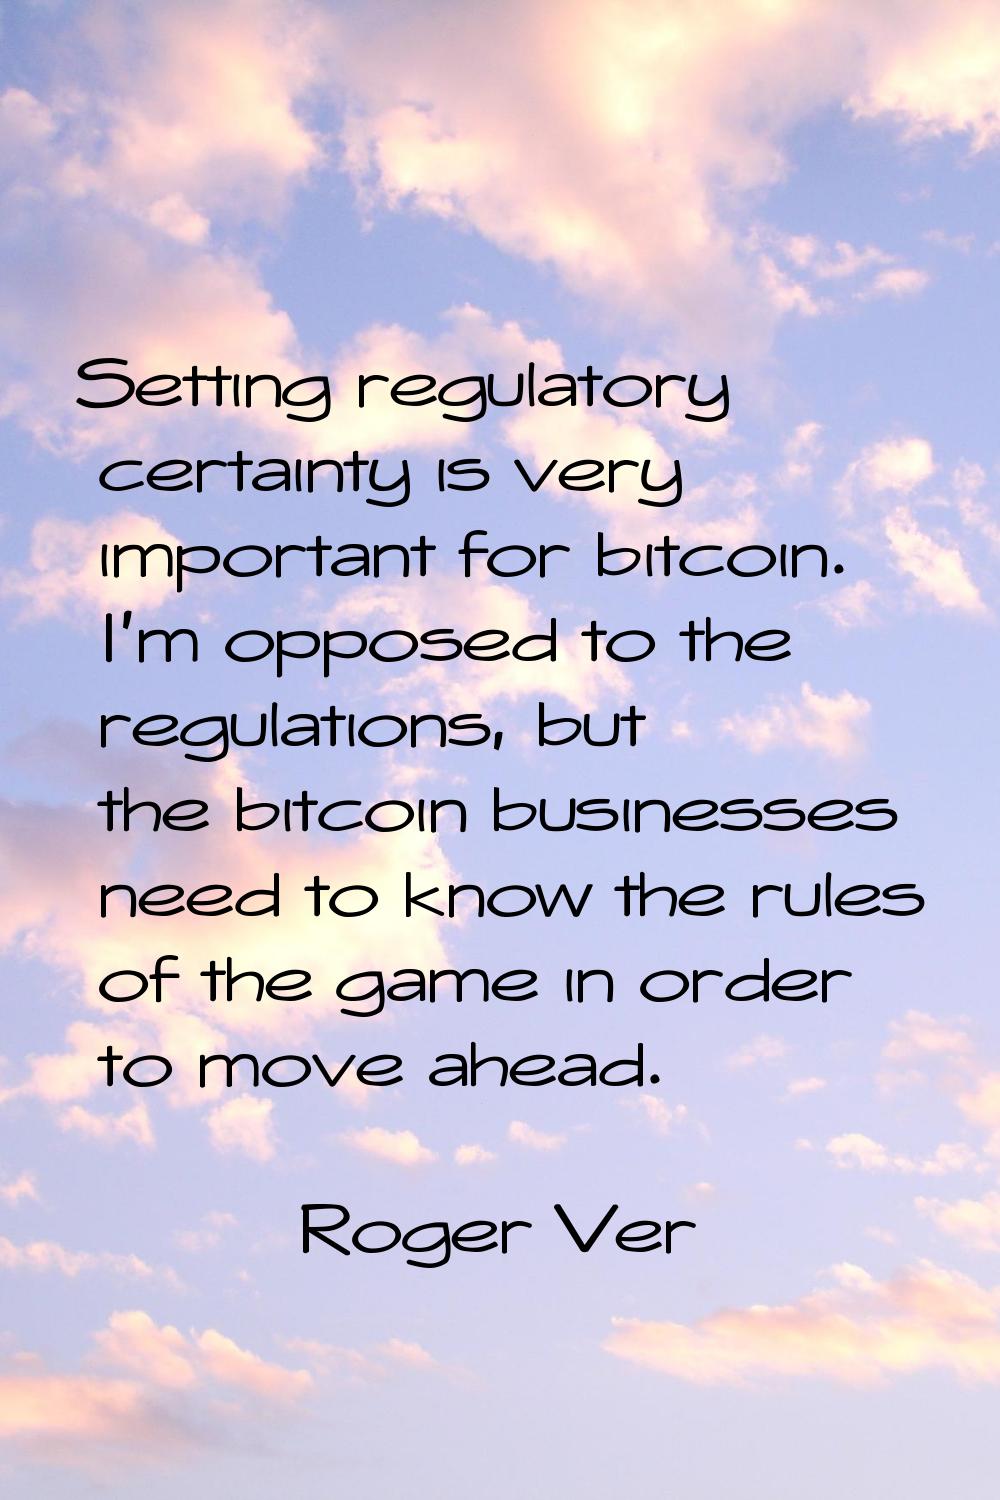 Setting regulatory certainty is very important for bitcoin. I'm opposed to the regulations, but the